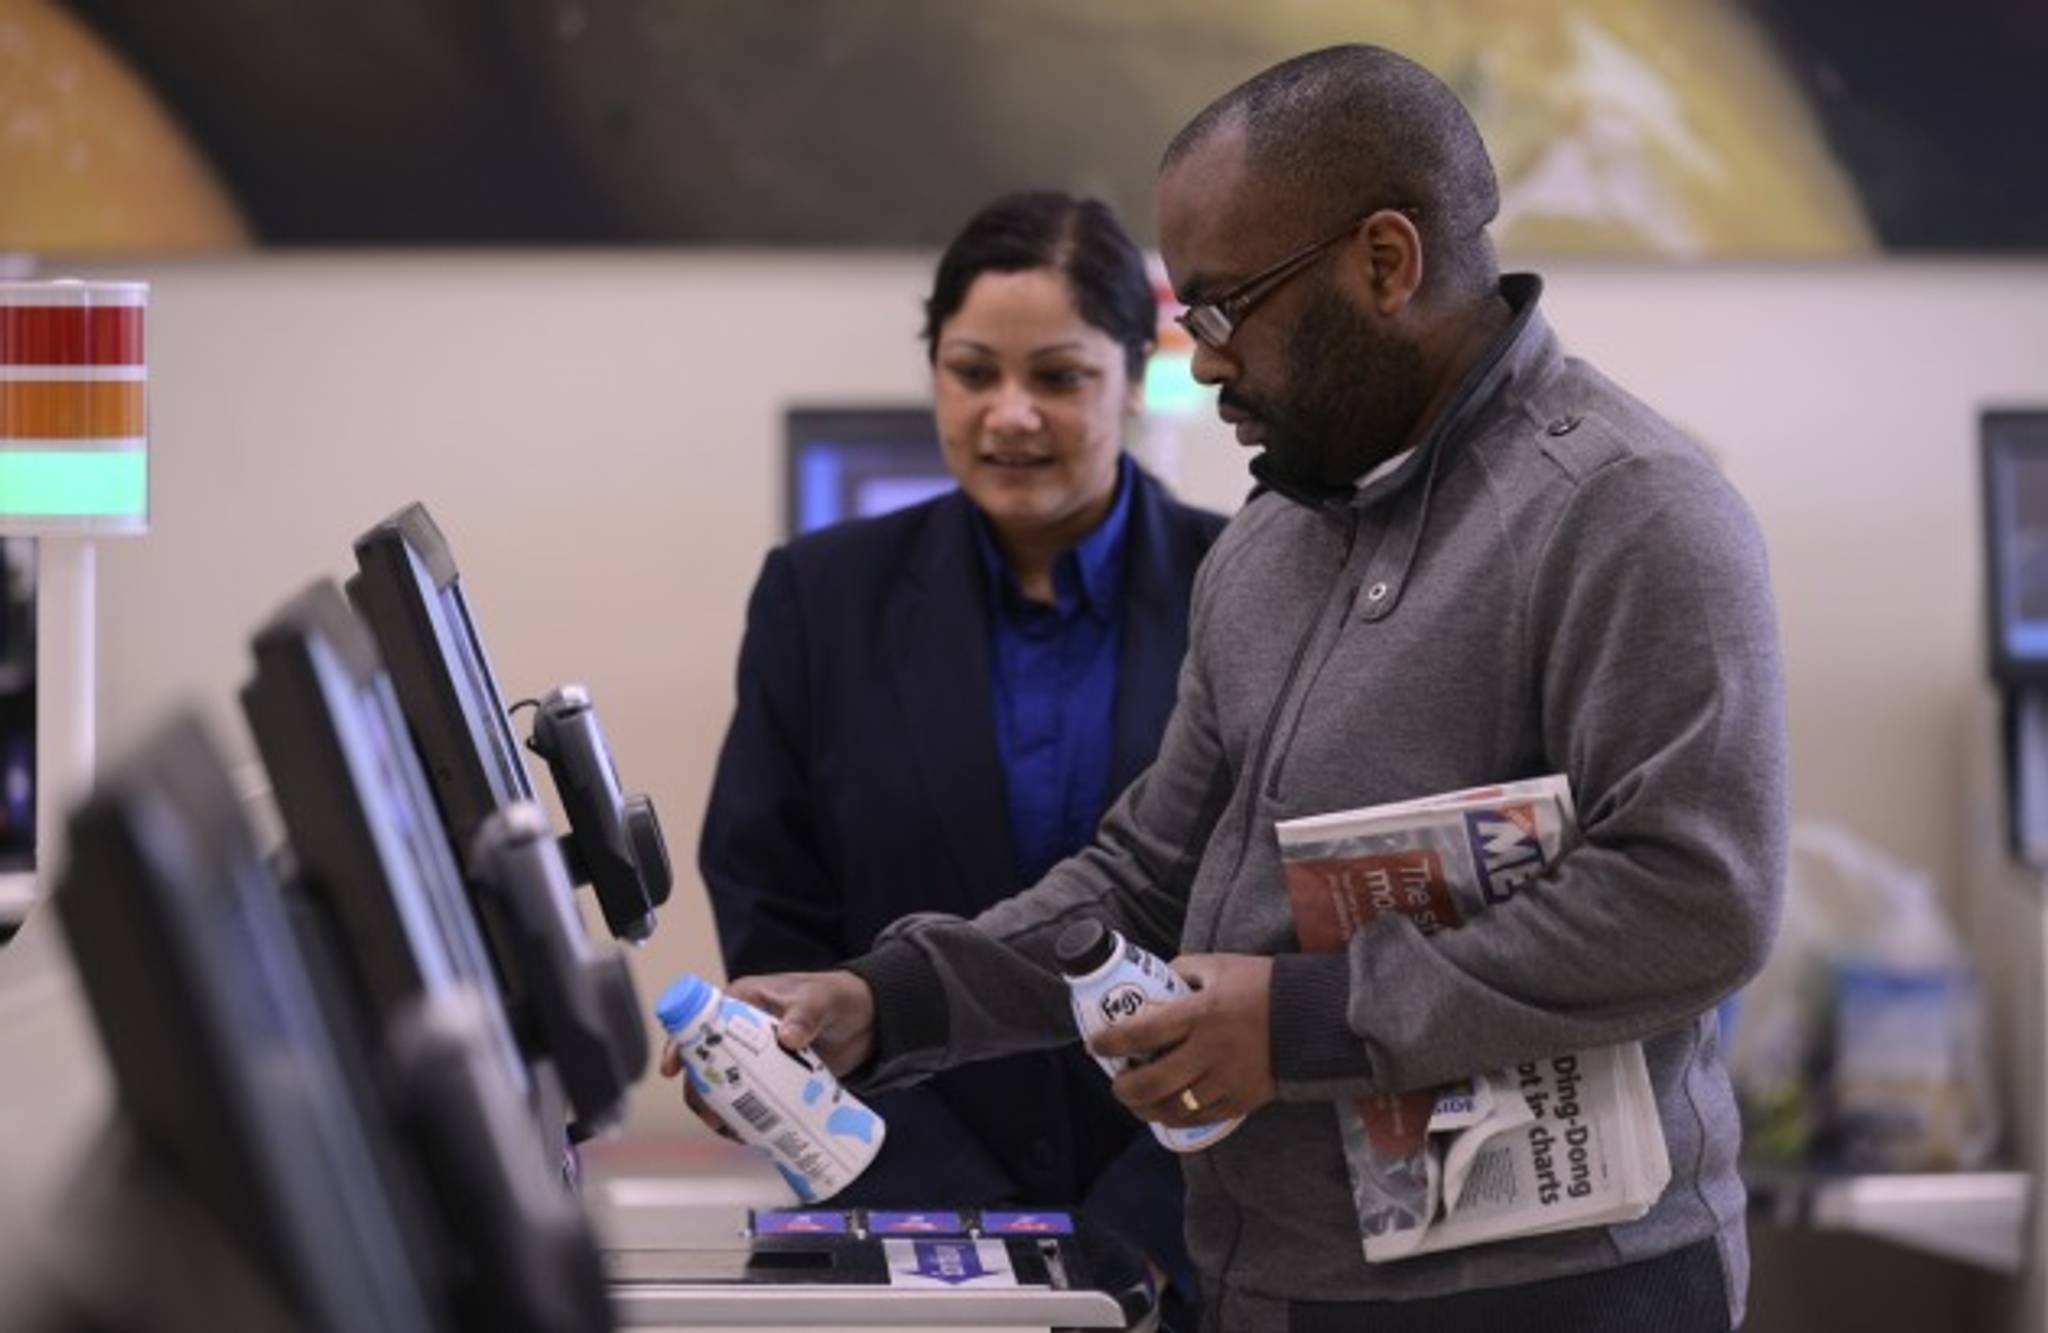 Self-service: leaving shoppers to their own devices